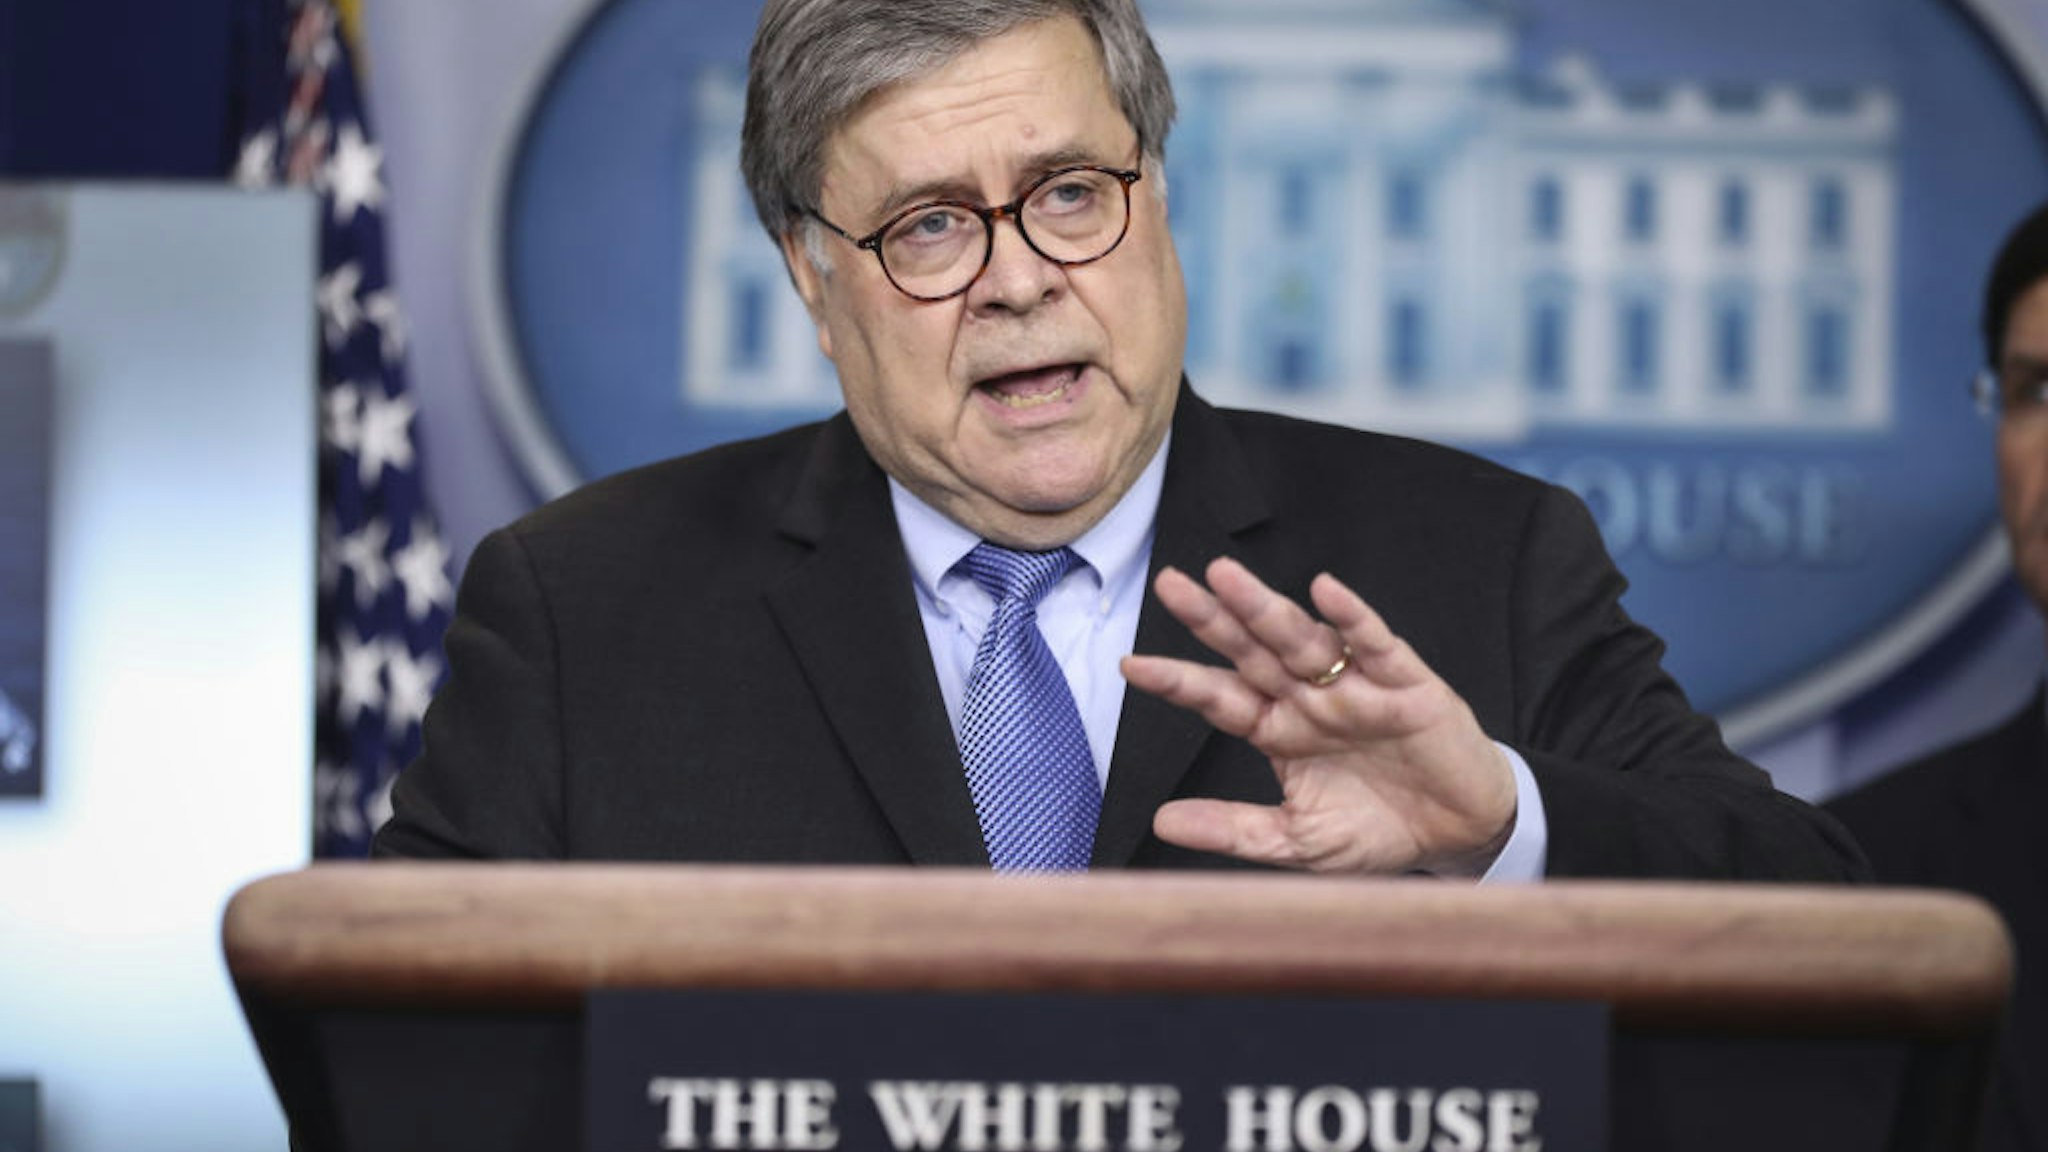 Attorney General William Barr speaks during a Coronavirus Task Force news conference at the White House in Washington, D.C., U.S., on Wednesday, April 1, 2020. President Donald Trump is coming under criticism for balking at taking full advantage of Obamacare as the number of people infected with the new coronavirus in the U.S. tops 200,000. Photographer: Oliver Contreras/SIPA/Bloomberg via Getty Images